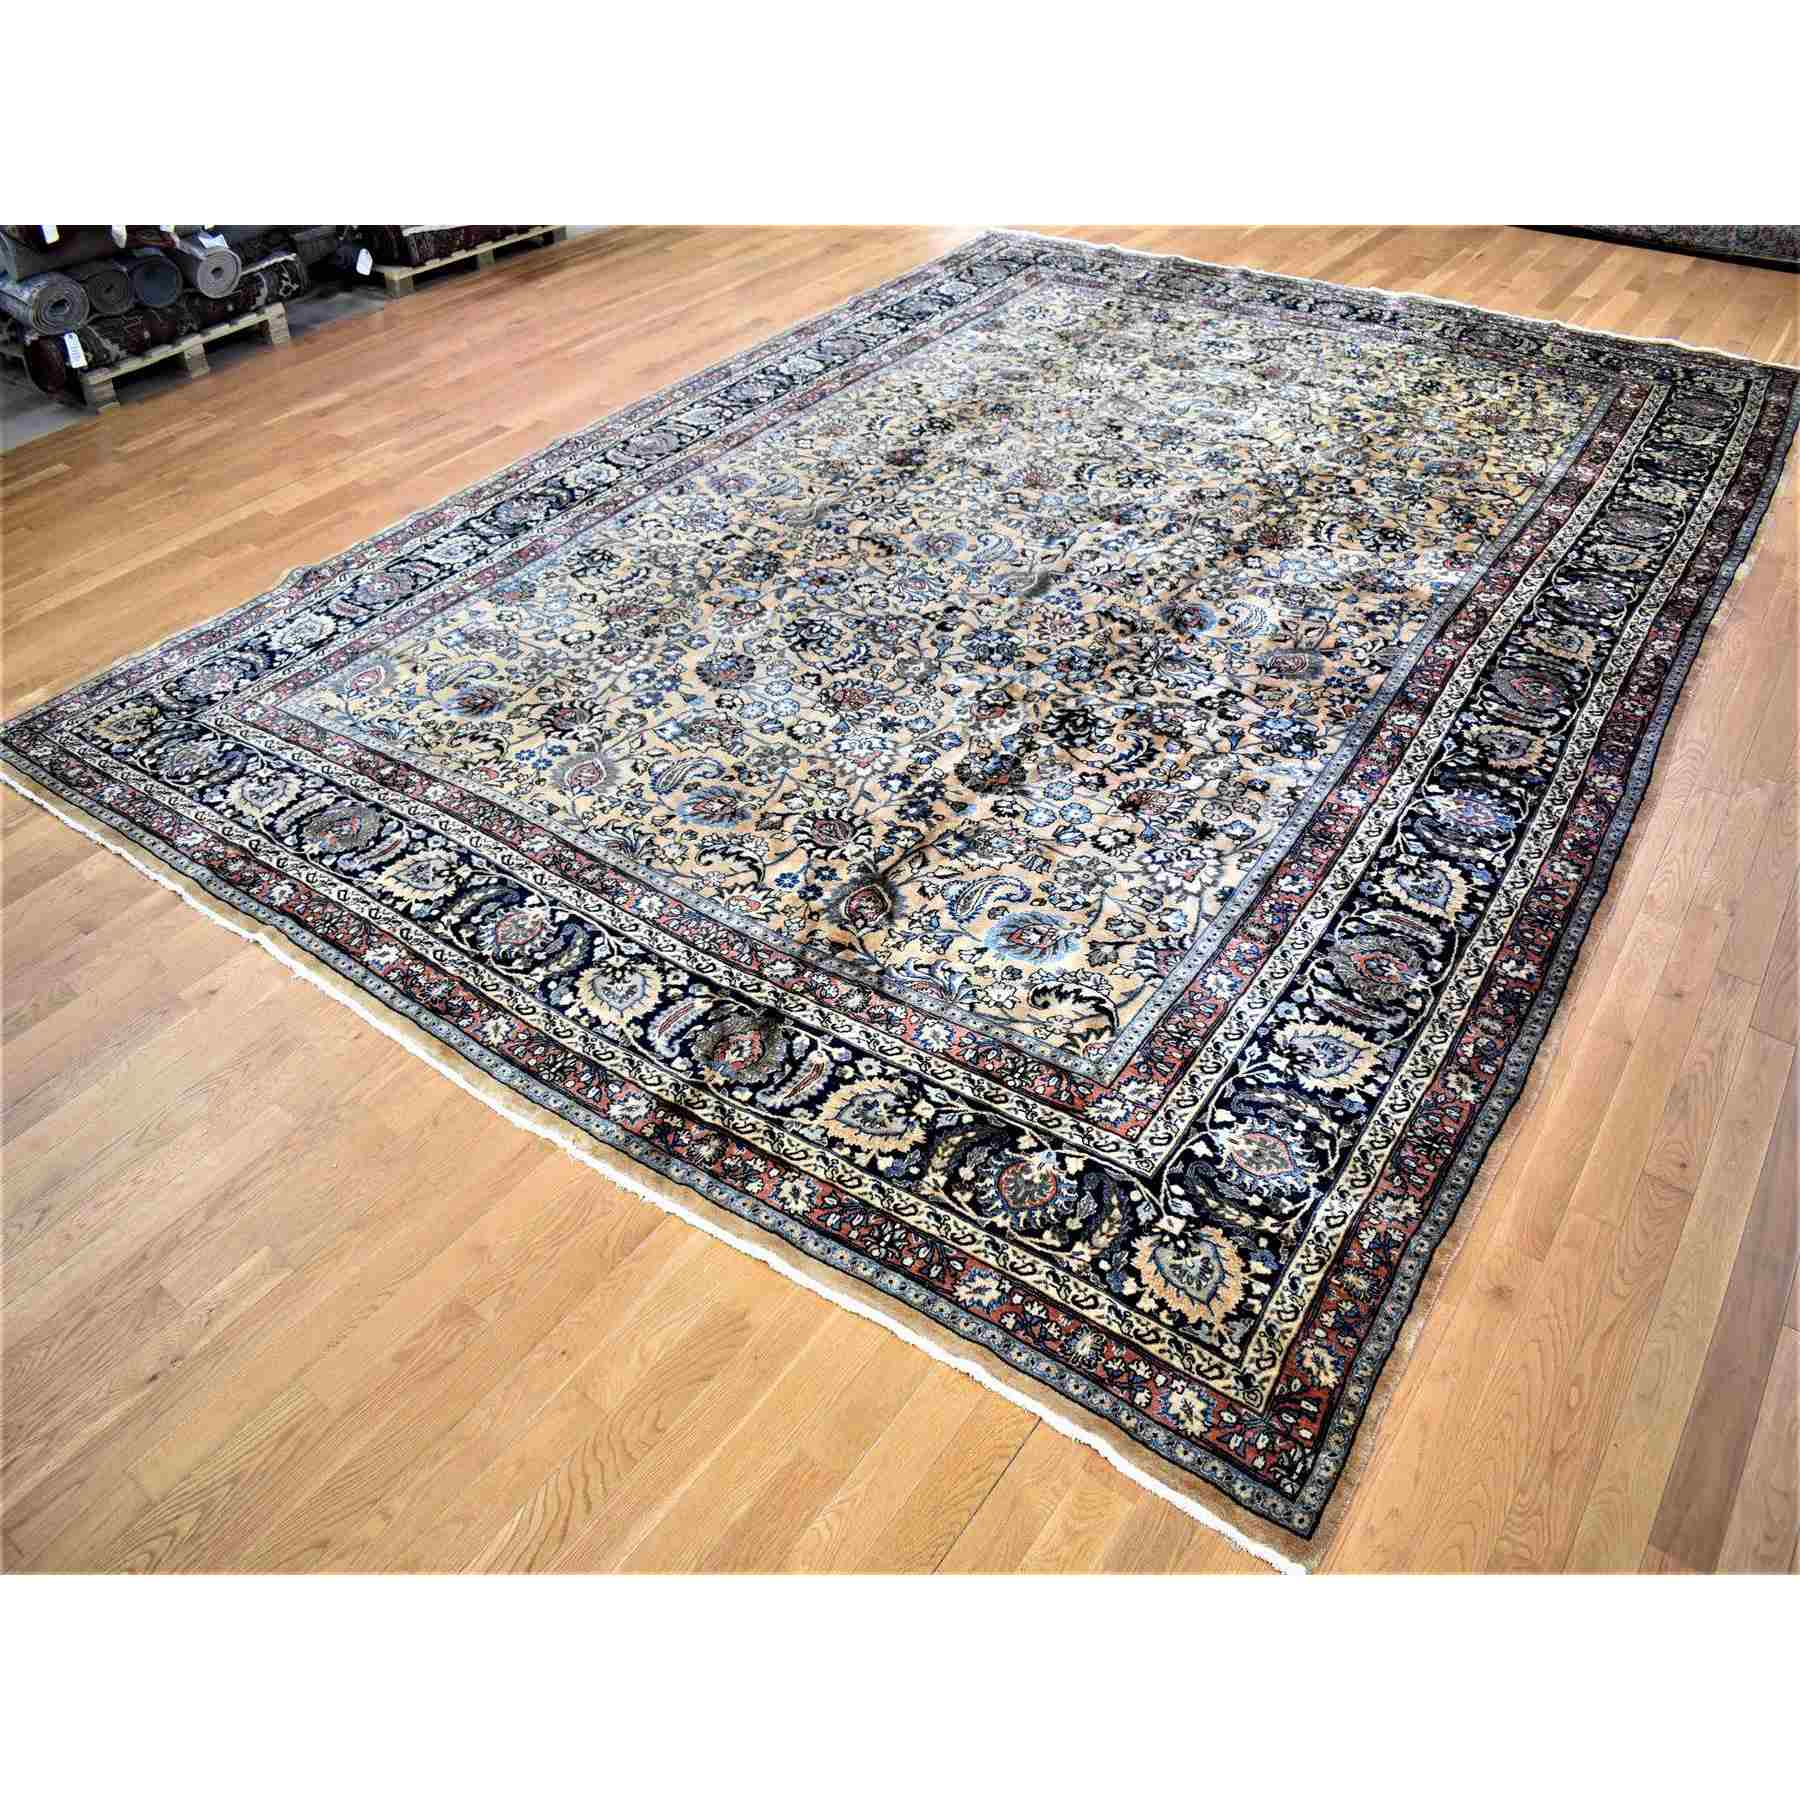 Antique-Hand-Knotted-Rug-400565